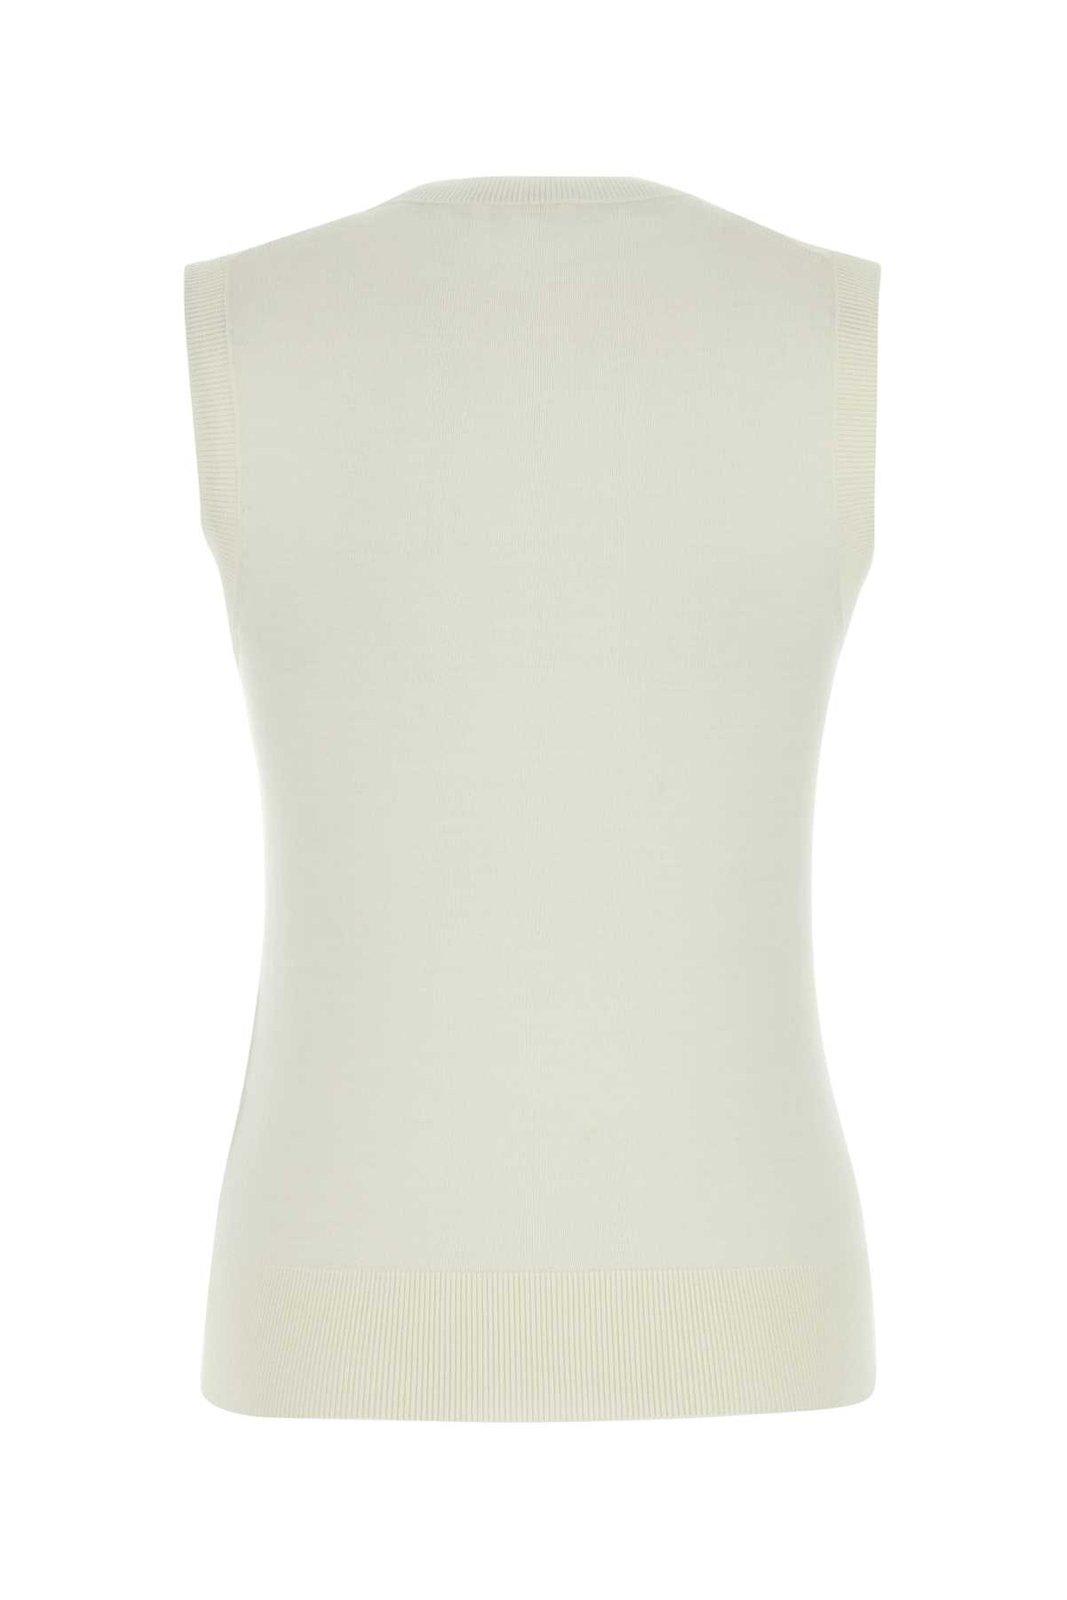 Shop Chloé Sleeveless Knitted Top In White